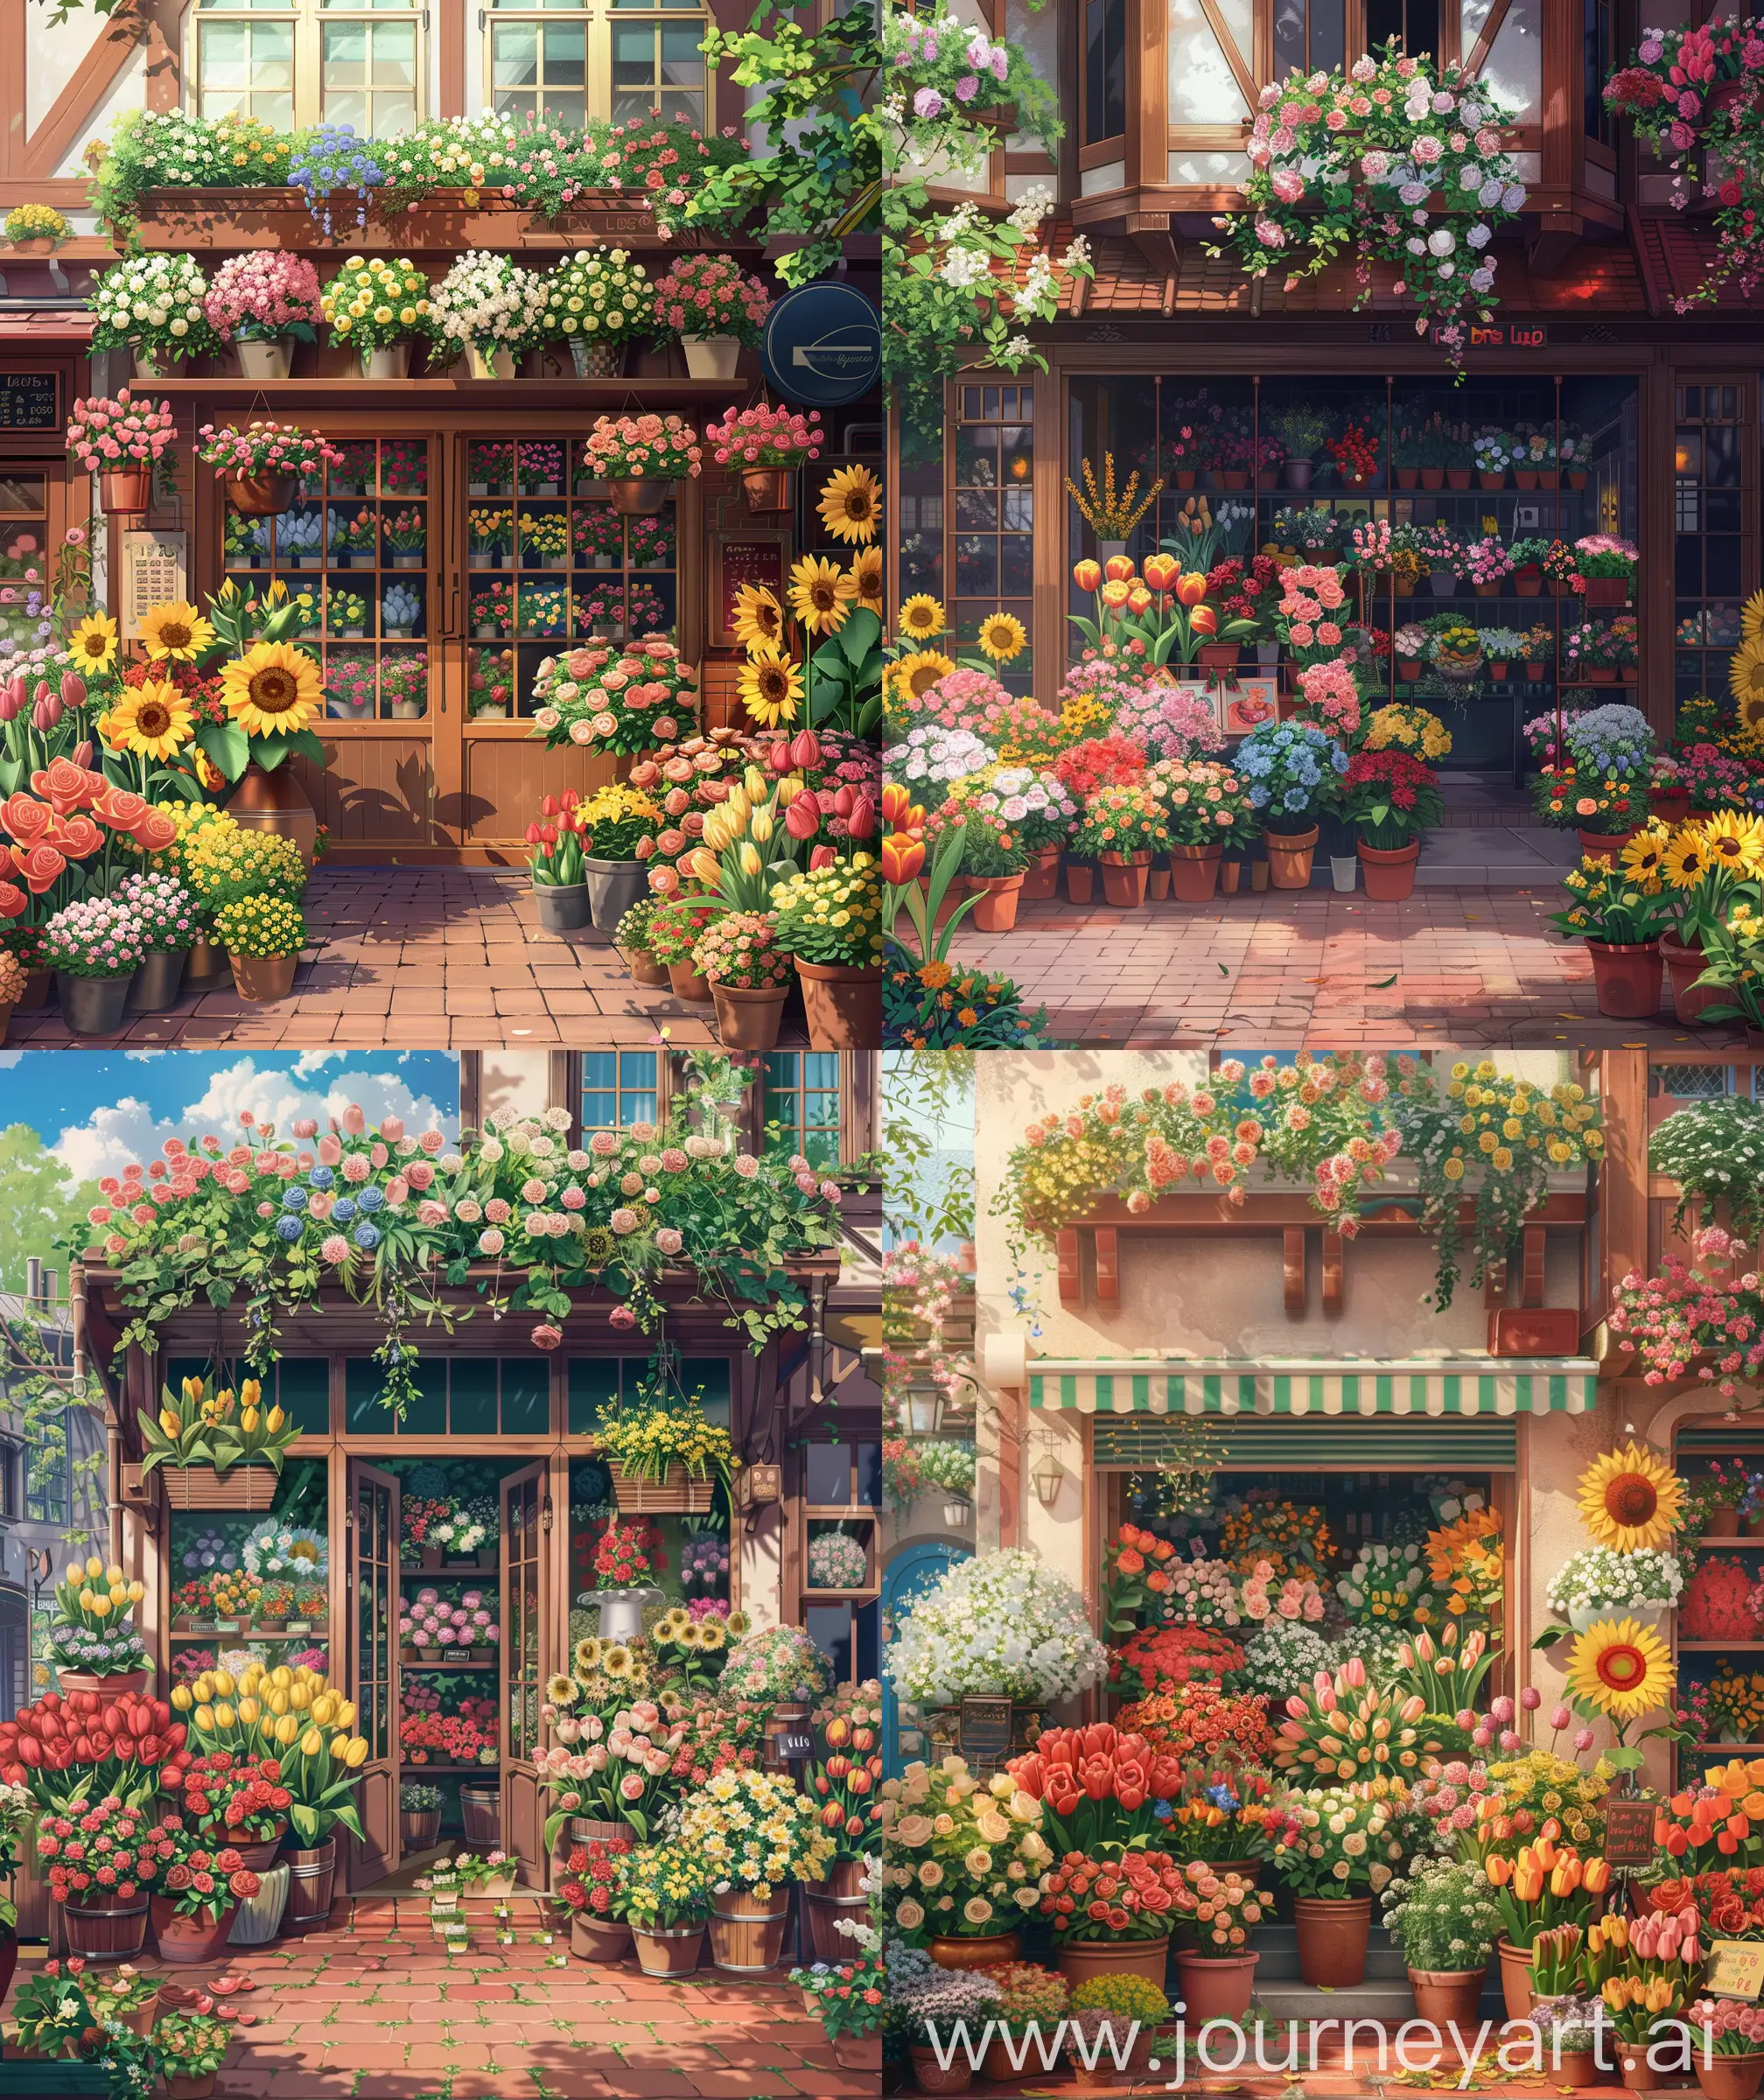 Anime scenary, vintage style, illustration, direct front facade view of flower shop, many flowers, rose, tulip, sunflower, many beautiful flowers, display in flower shop front, beautiful view, aesthetic look, anime scenary, Ghibli look, illustration, ultra HD, high quality, no blurry image, no hyperrealistic --ar 27:32 